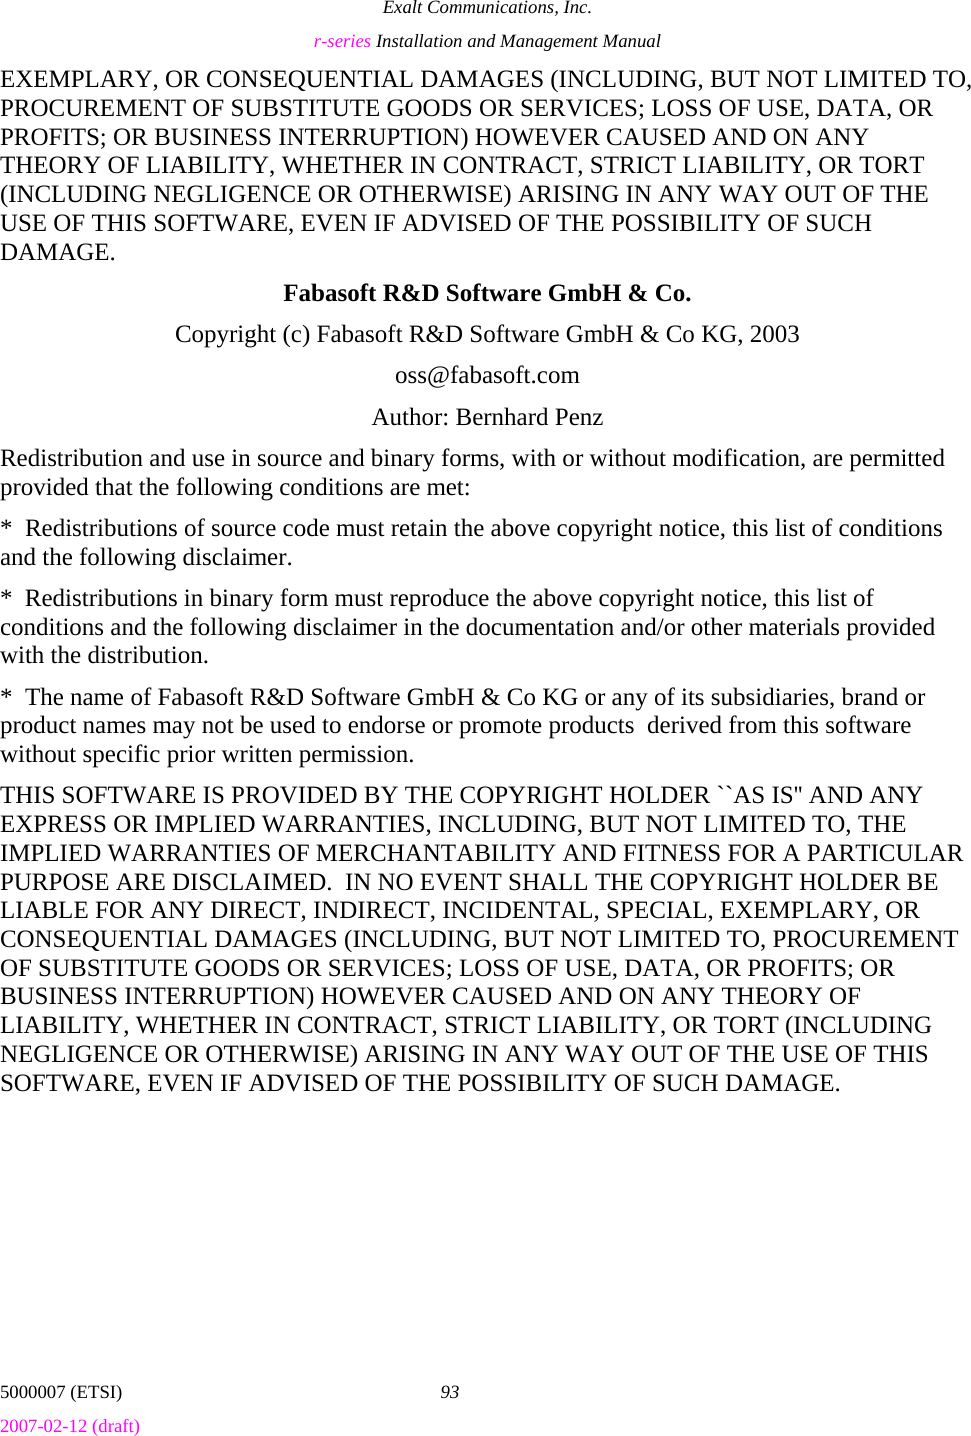 Exalt Communications, Inc. r-series Installation and Management Manual 5000007 (ETSI)  93 2007-02-12 (draft)  EXEMPLARY, OR CONSEQUENTIAL DAMAGES (INCLUDING, BUT NOT LIMITED TO, PROCUREMENT OF SUBSTITUTE GOODS OR SERVICES; LOSS OF USE, DATA, OR PROFITS; OR BUSINESS INTERRUPTION) HOWEVER CAUSED AND ON ANY THEORY OF LIABILITY, WHETHER IN CONTRACT, STRICT LIABILITY, OR TORT (INCLUDING NEGLIGENCE OR OTHERWISE) ARISING IN ANY WAY OUT OF THE USE OF THIS SOFTWARE, EVEN IF ADVISED OF THE POSSIBILITY OF SUCH DAMAGE. Fabasoft R&amp;D Software GmbH &amp; Co. Copyright (c) Fabasoft R&amp;D Software GmbH &amp; Co KG, 2003 oss@fabasoft.com Author: Bernhard Penz Redistribution and use in source and binary forms, with or without modification, are permitted provided that the following conditions are met: *  Redistributions of source code must retain the above copyright notice, this list of conditions and the following disclaimer. *  Redistributions in binary form must reproduce the above copyright notice, this list of conditions and the following disclaimer in the documentation and/or other materials provided with the distribution. *  The name of Fabasoft R&amp;D Software GmbH &amp; Co KG or any of its subsidiaries, brand or product names may not be used to endorse or promote products  derived from this software without specific prior written permission. THIS SOFTWARE IS PROVIDED BY THE COPYRIGHT HOLDER ``AS IS&apos;&apos; AND ANY EXPRESS OR IMPLIED WARRANTIES, INCLUDING, BUT NOT LIMITED TO, THE IMPLIED WARRANTIES OF MERCHANTABILITY AND FITNESS FOR A PARTICULAR PURPOSE ARE DISCLAIMED.  IN NO EVENT SHALL THE COPYRIGHT HOLDER BE LIABLE FOR ANY DIRECT, INDIRECT, INCIDENTAL, SPECIAL, EXEMPLARY, OR CONSEQUENTIAL DAMAGES (INCLUDING, BUT NOT LIMITED TO, PROCUREMENT OF SUBSTITUTE GOODS OR SERVICES; LOSS OF USE, DATA, OR PROFITS; OR BUSINESS INTERRUPTION) HOWEVER CAUSED AND ON ANY THEORY OF LIABILITY, WHETHER IN CONTRACT, STRICT LIABILITY, OR TORT (INCLUDING NEGLIGENCE OR OTHERWISE) ARISING IN ANY WAY OUT OF THE USE OF THIS SOFTWARE, EVEN IF ADVISED OF THE POSSIBILITY OF SUCH DAMAGE. 